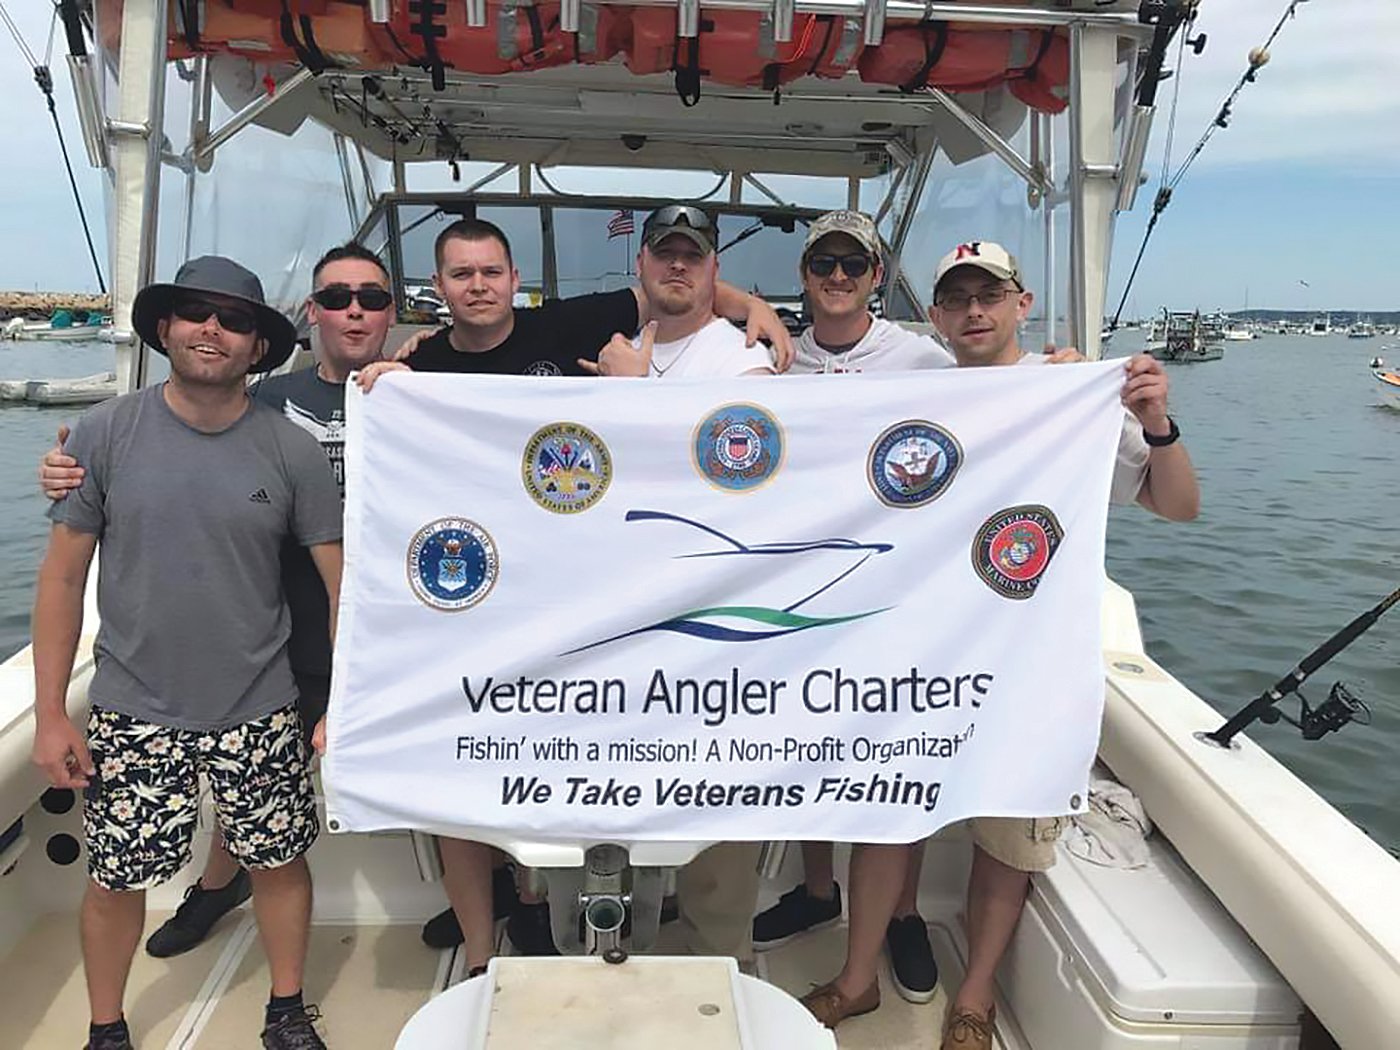 Veterans often charter River Rebel Charters of Bristol to fish for free as part of the Veteran Angler Charters program.